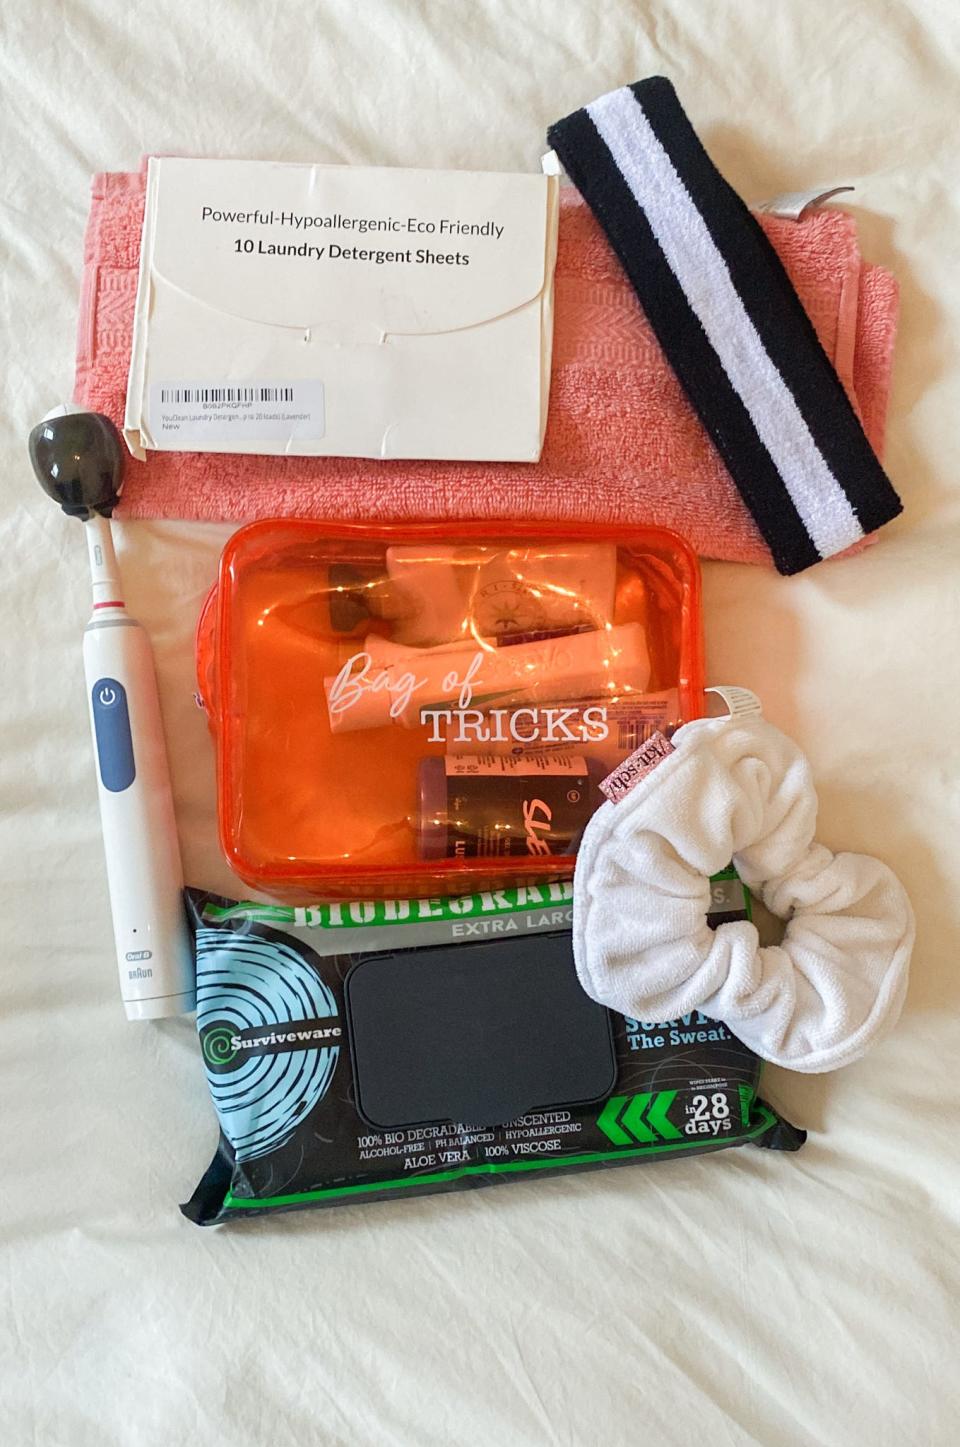 The author's toiletries on a white sheet including a sweatband and white package of laundry sheets on top of a pink rag. Below these items, there's a white and blue electric toothbrush with an astronaut helmet shaped cover, an orange bag of liquid items, a black package of wipes, and a thick, white scrunchy meant for drying hair.